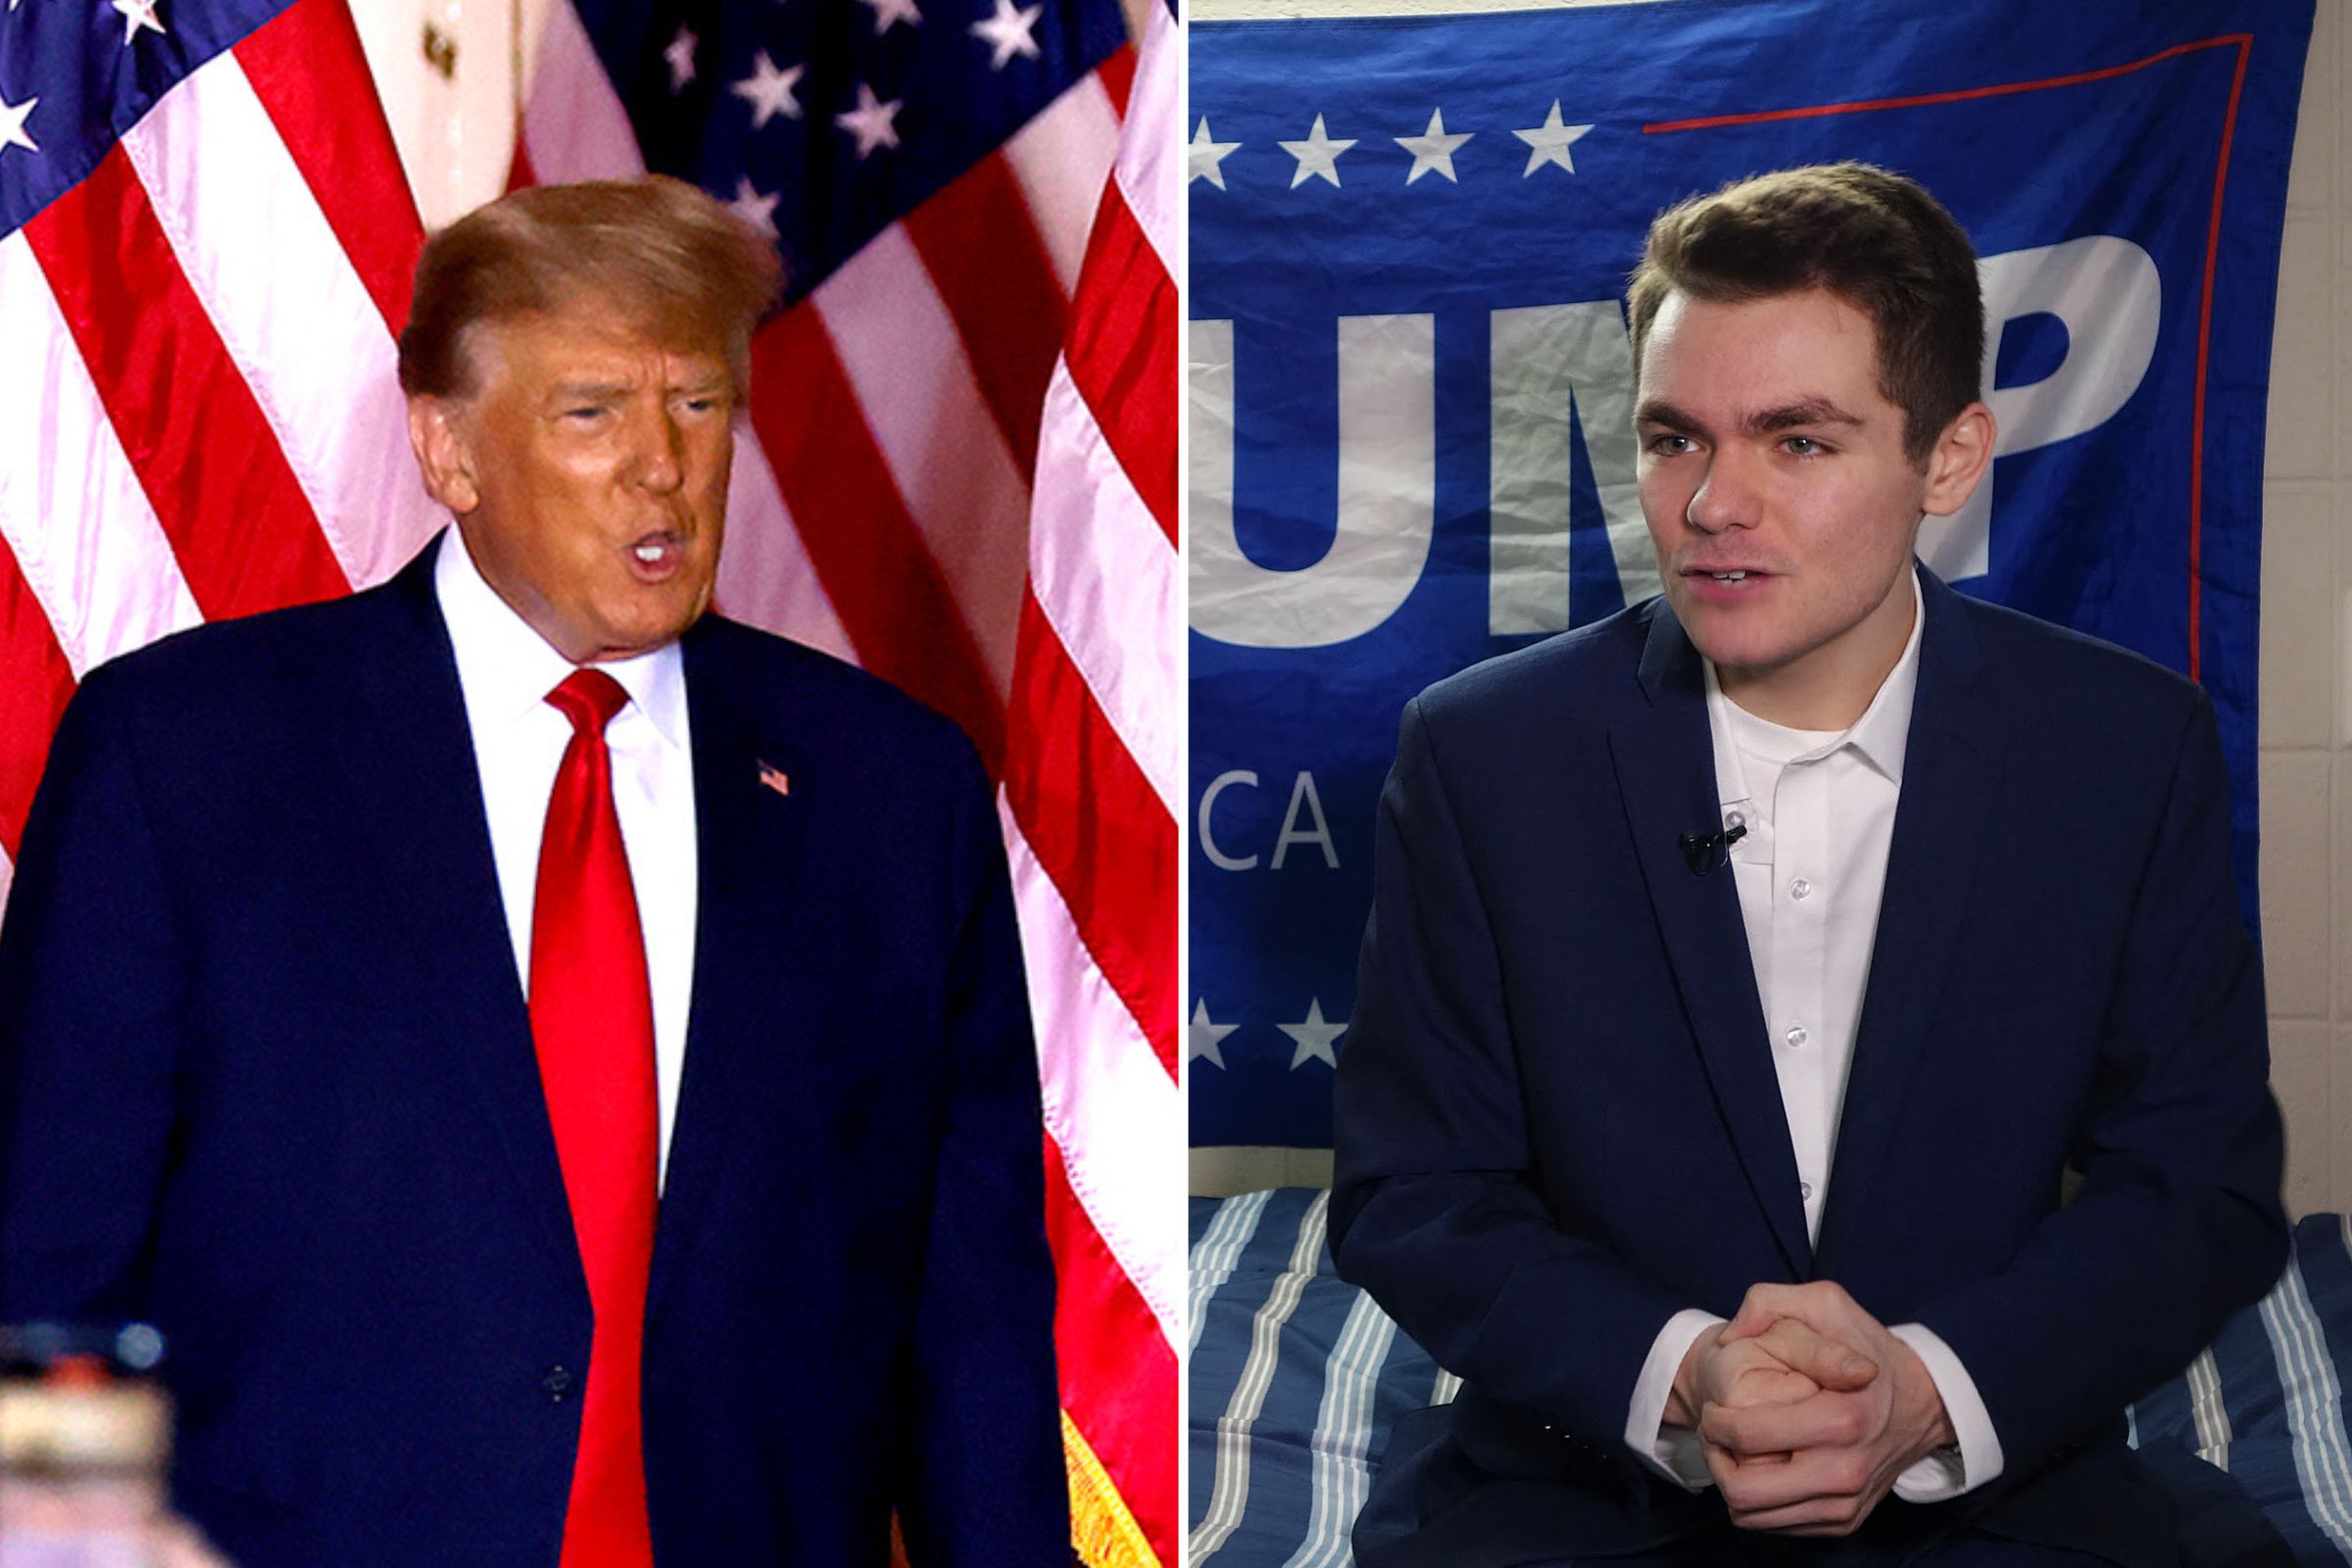 Nick Fuentes Turns on Donald Trump, Calls for New 2024 Candidate